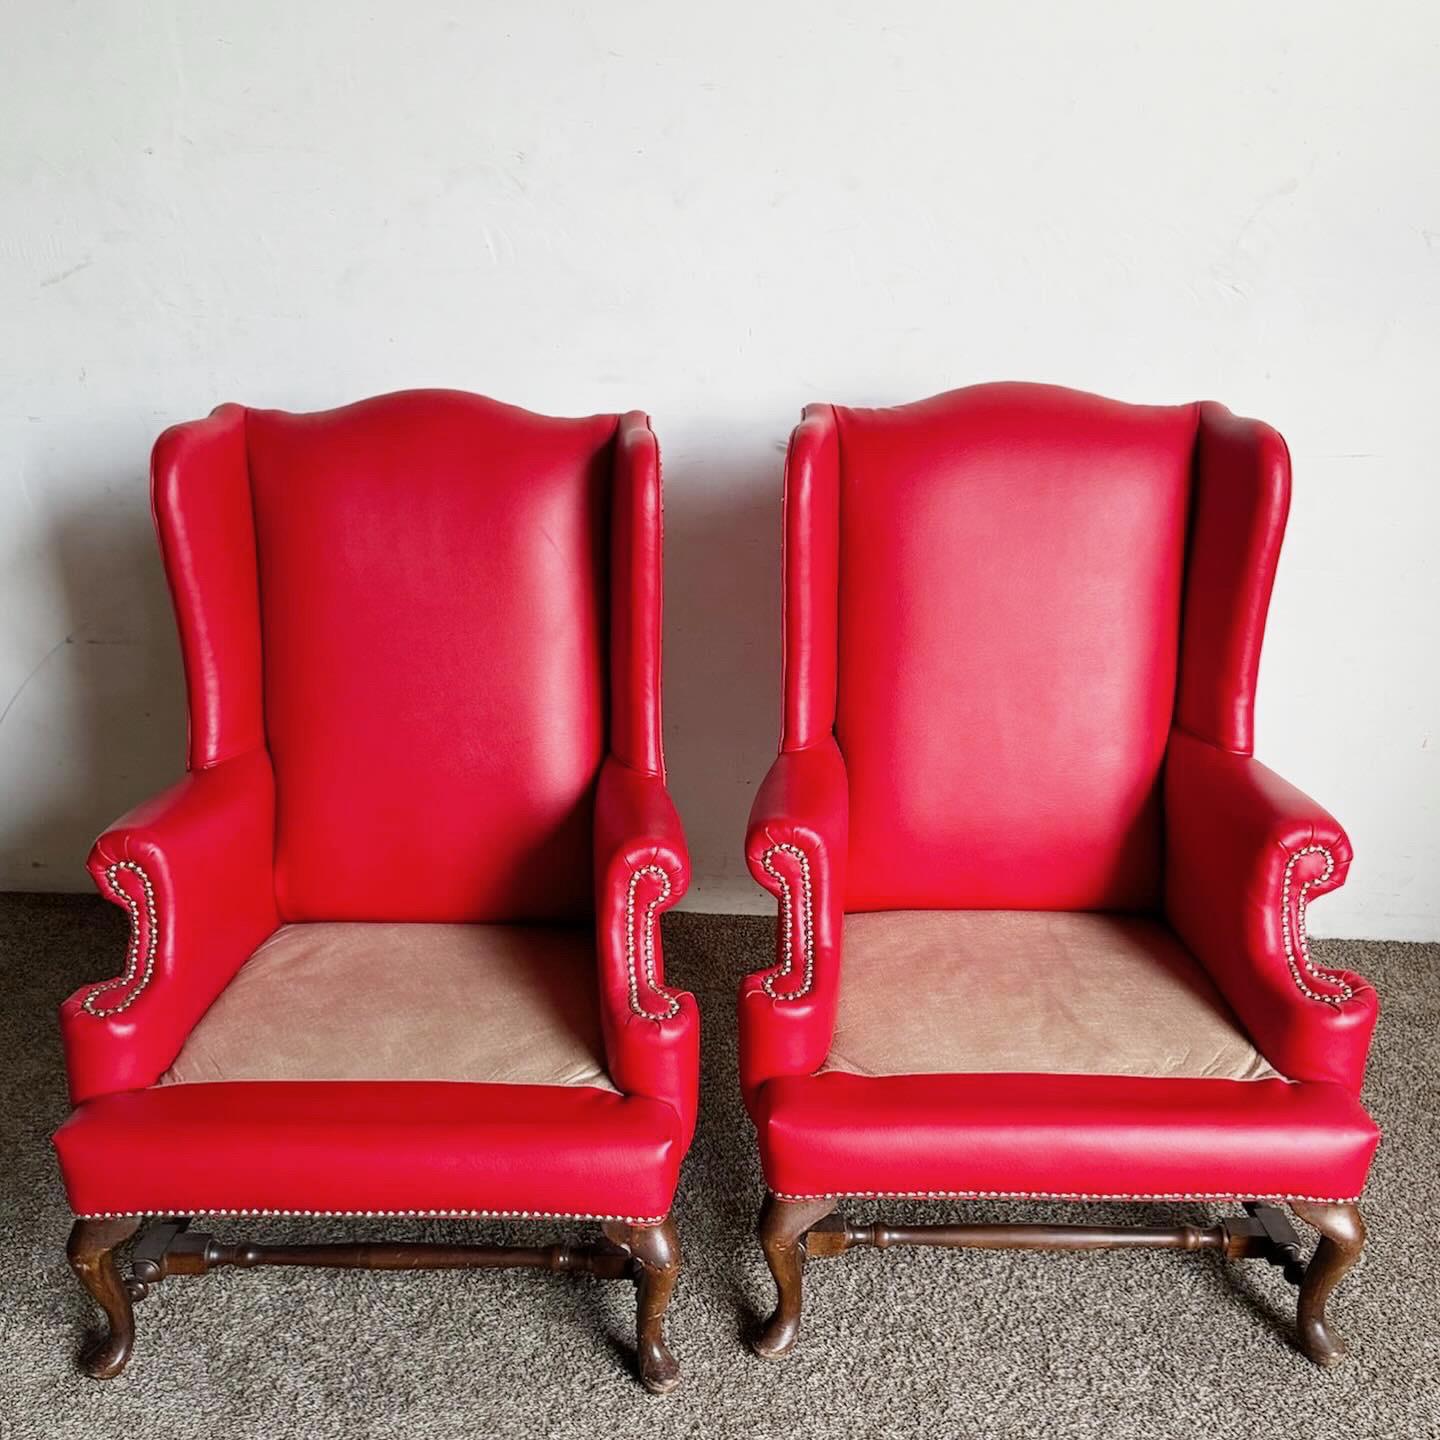 traditional wingback chair